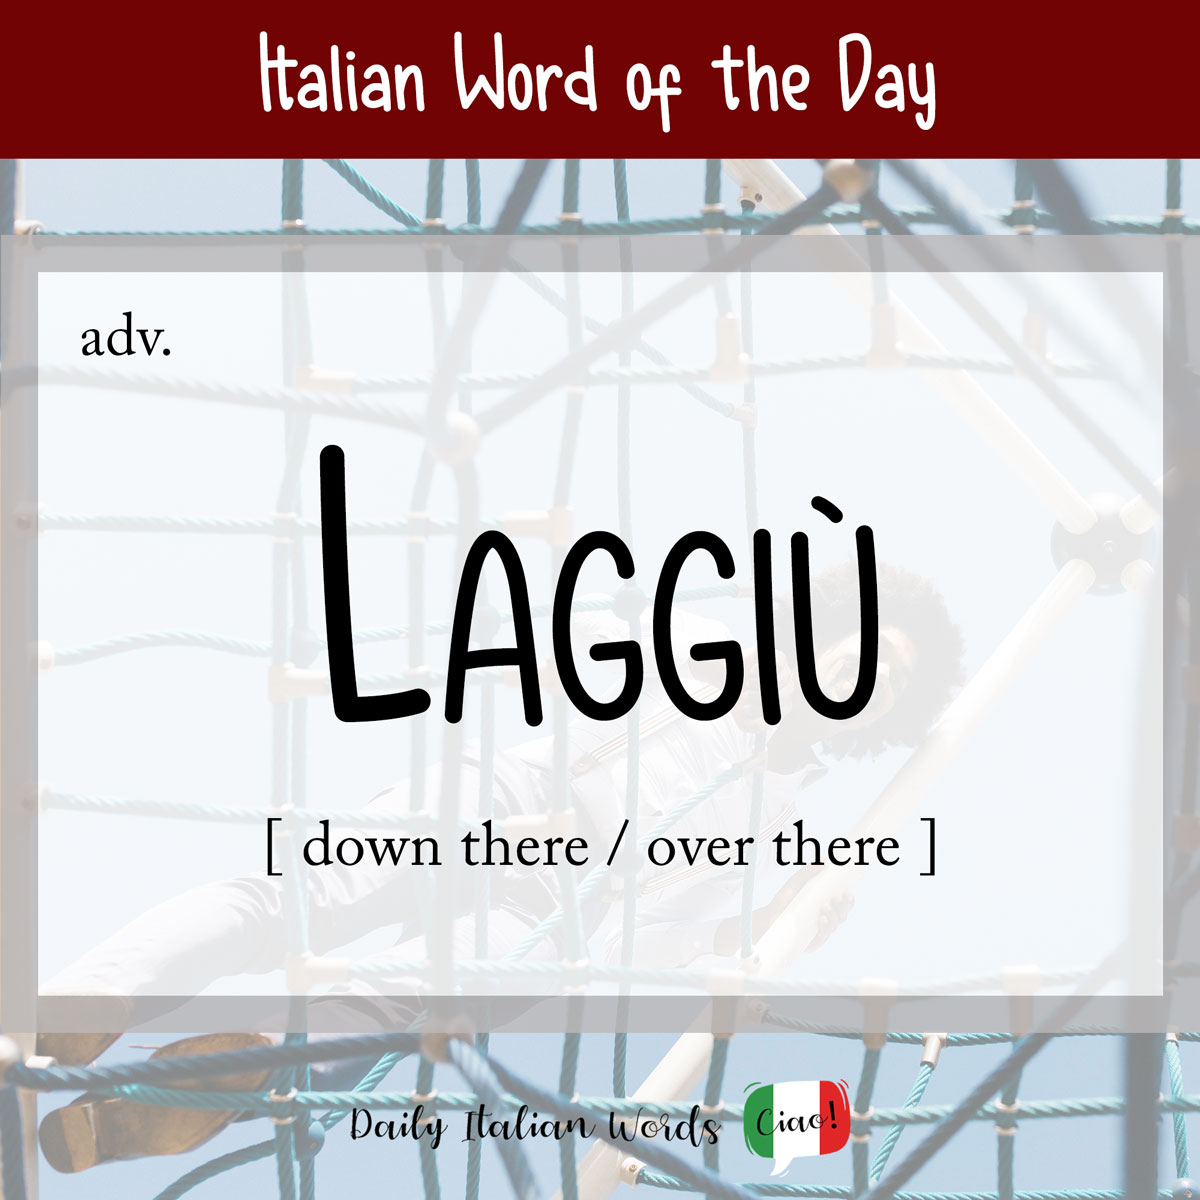 Italian Phrase of the Day: Laggiù (over there / down there)